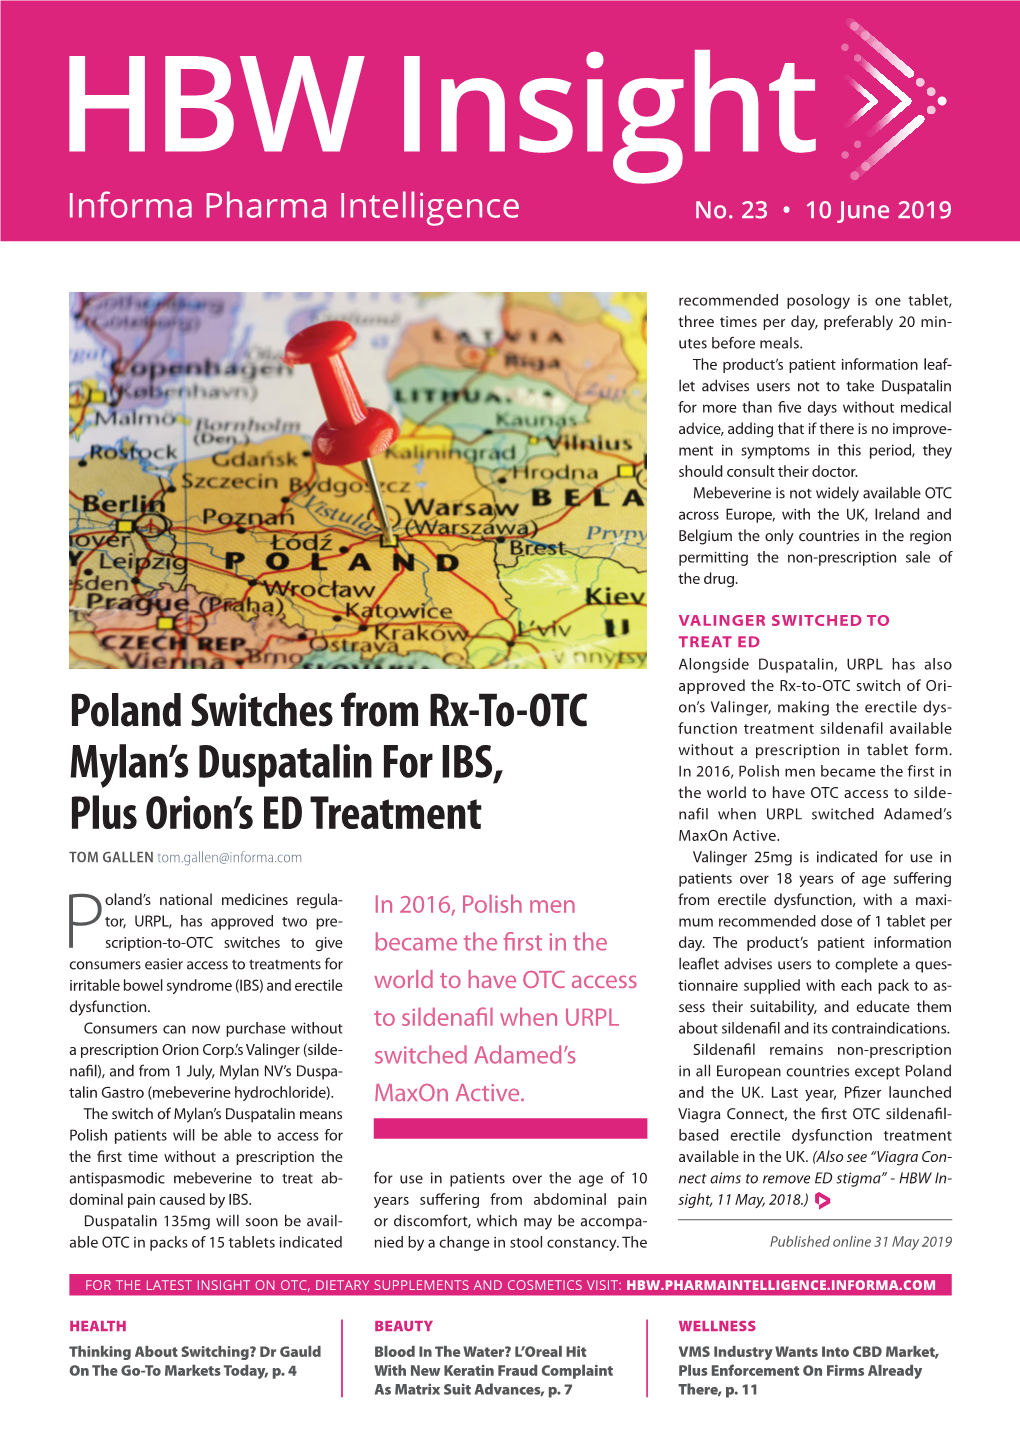 Poland Switches from Rx-To-OTC Mylan's Duspatalin for IBS, Plus Orion's ED Treatment